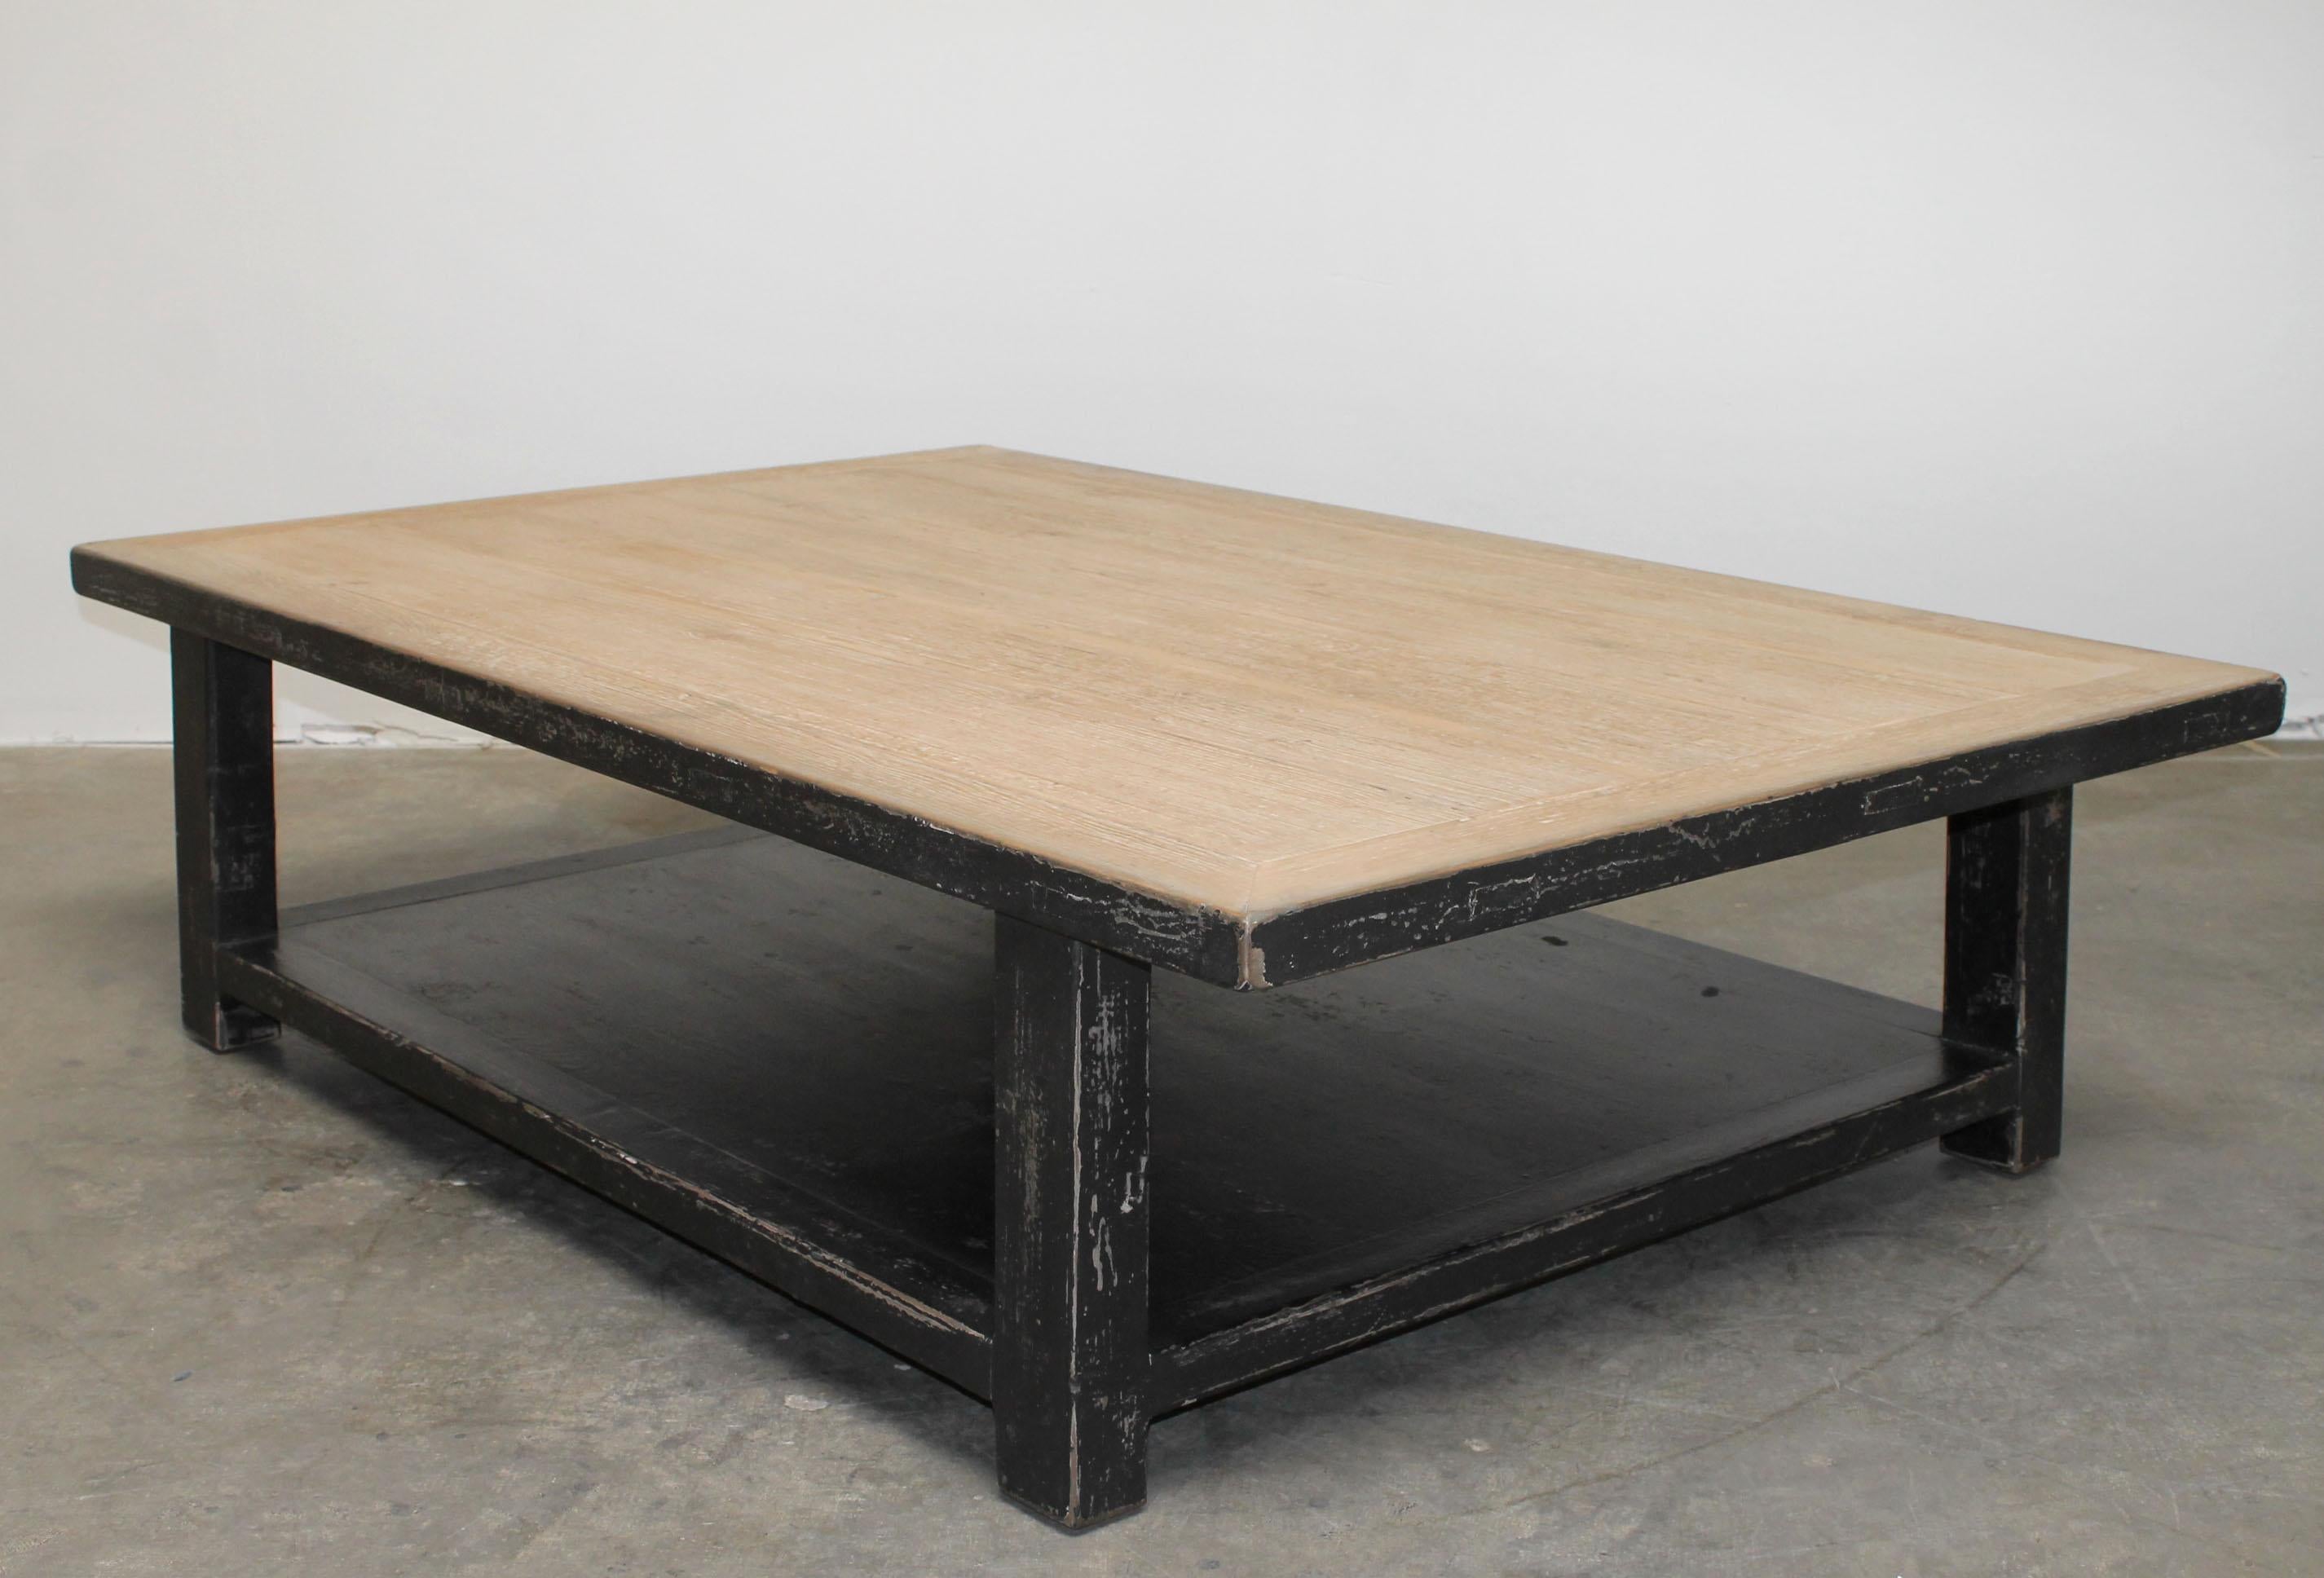 Contemporary Large Reclaimed Pine Wood Coffee Table with Distressed Black Finish